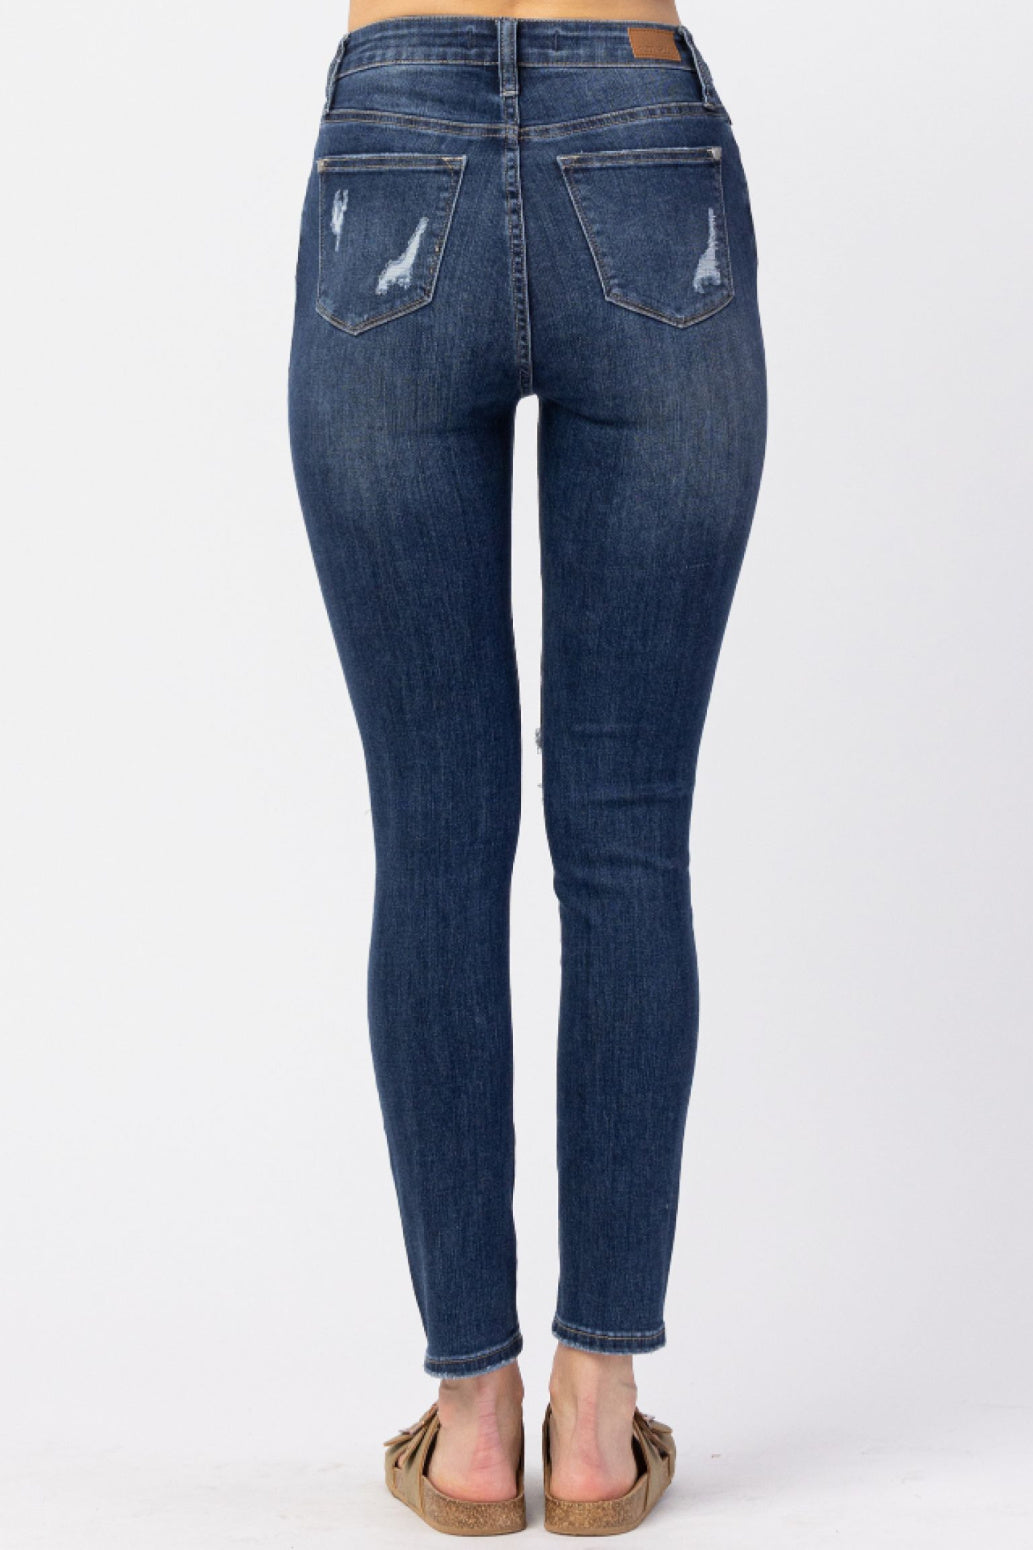 SEVEN7 Womens Blue Pocketed Button Fly High Rise Skinny Jeans 4 